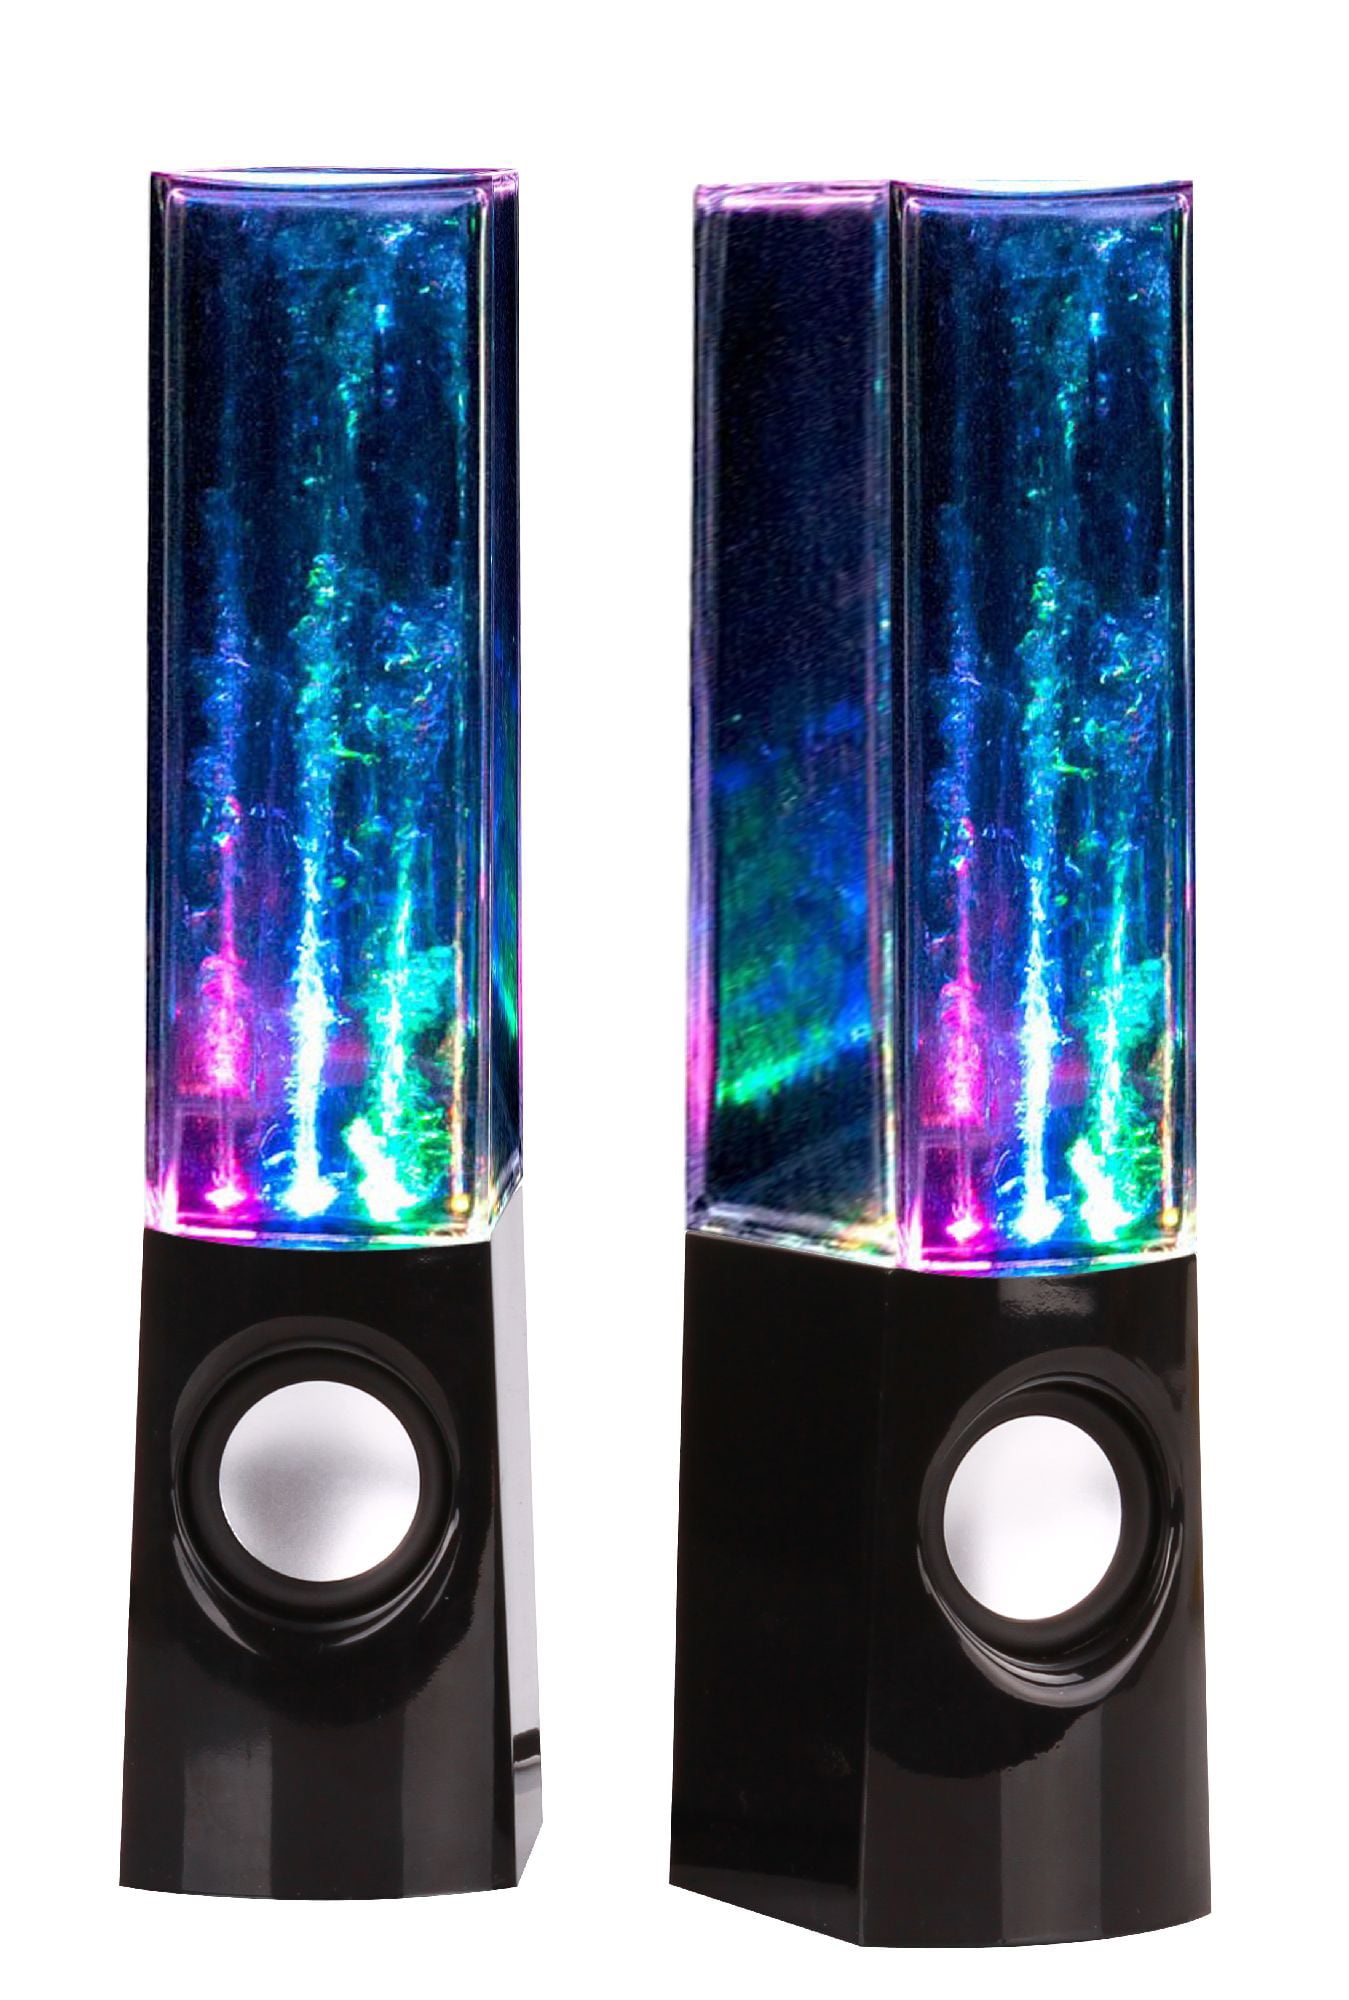 Bolan Plug & Play Multi-Color Illuminated Dancing Water Speaker Light Show  Water Fountain Speakers LED Speakers 3.5mm Audio Plug, 4 Color LED Lights